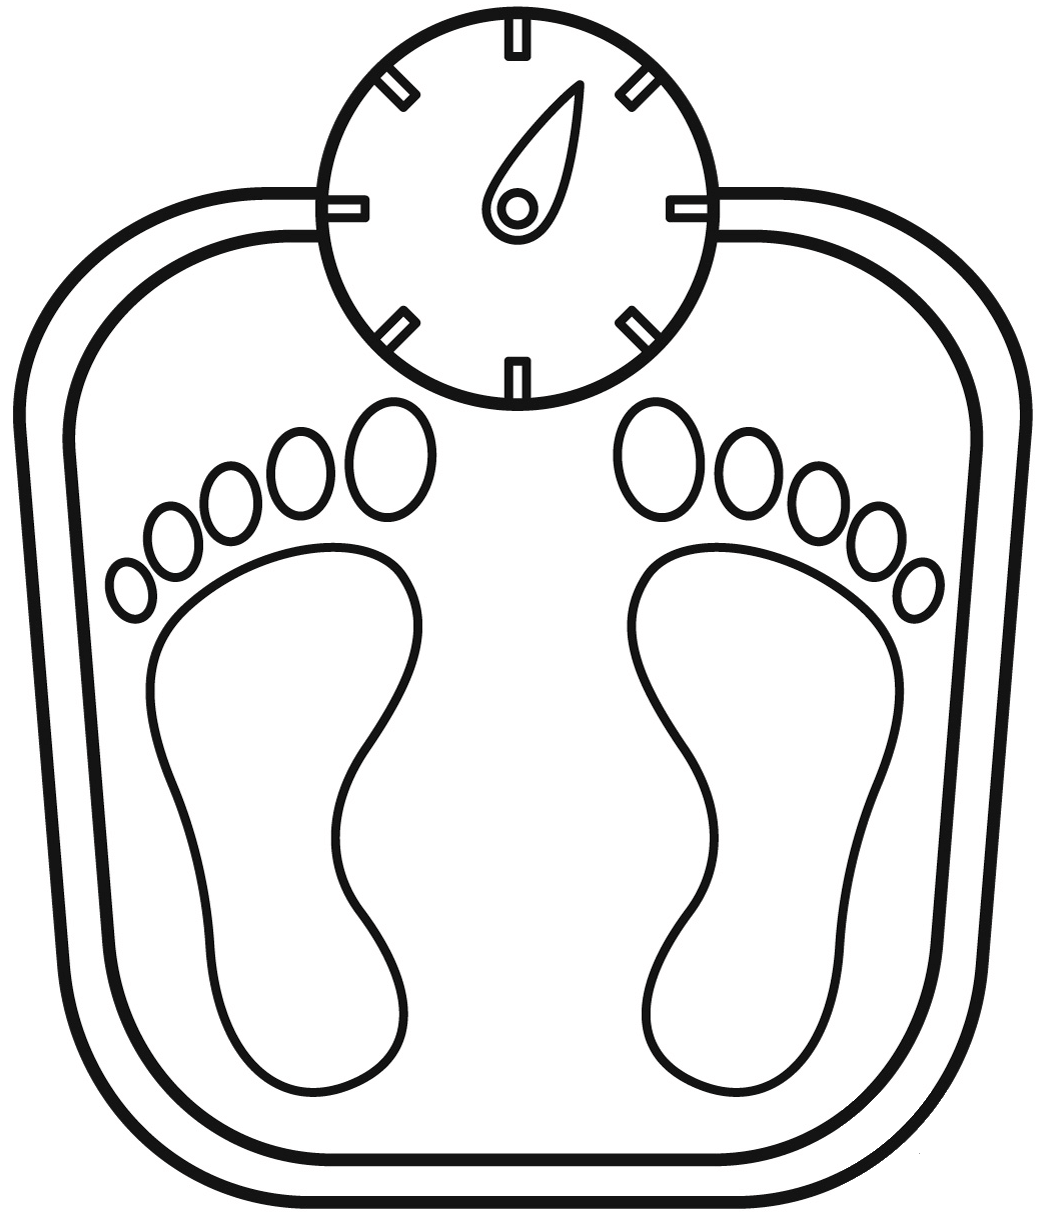 Weighing Scale Coloring Page Free Printable Coloring Pages | The Best ...